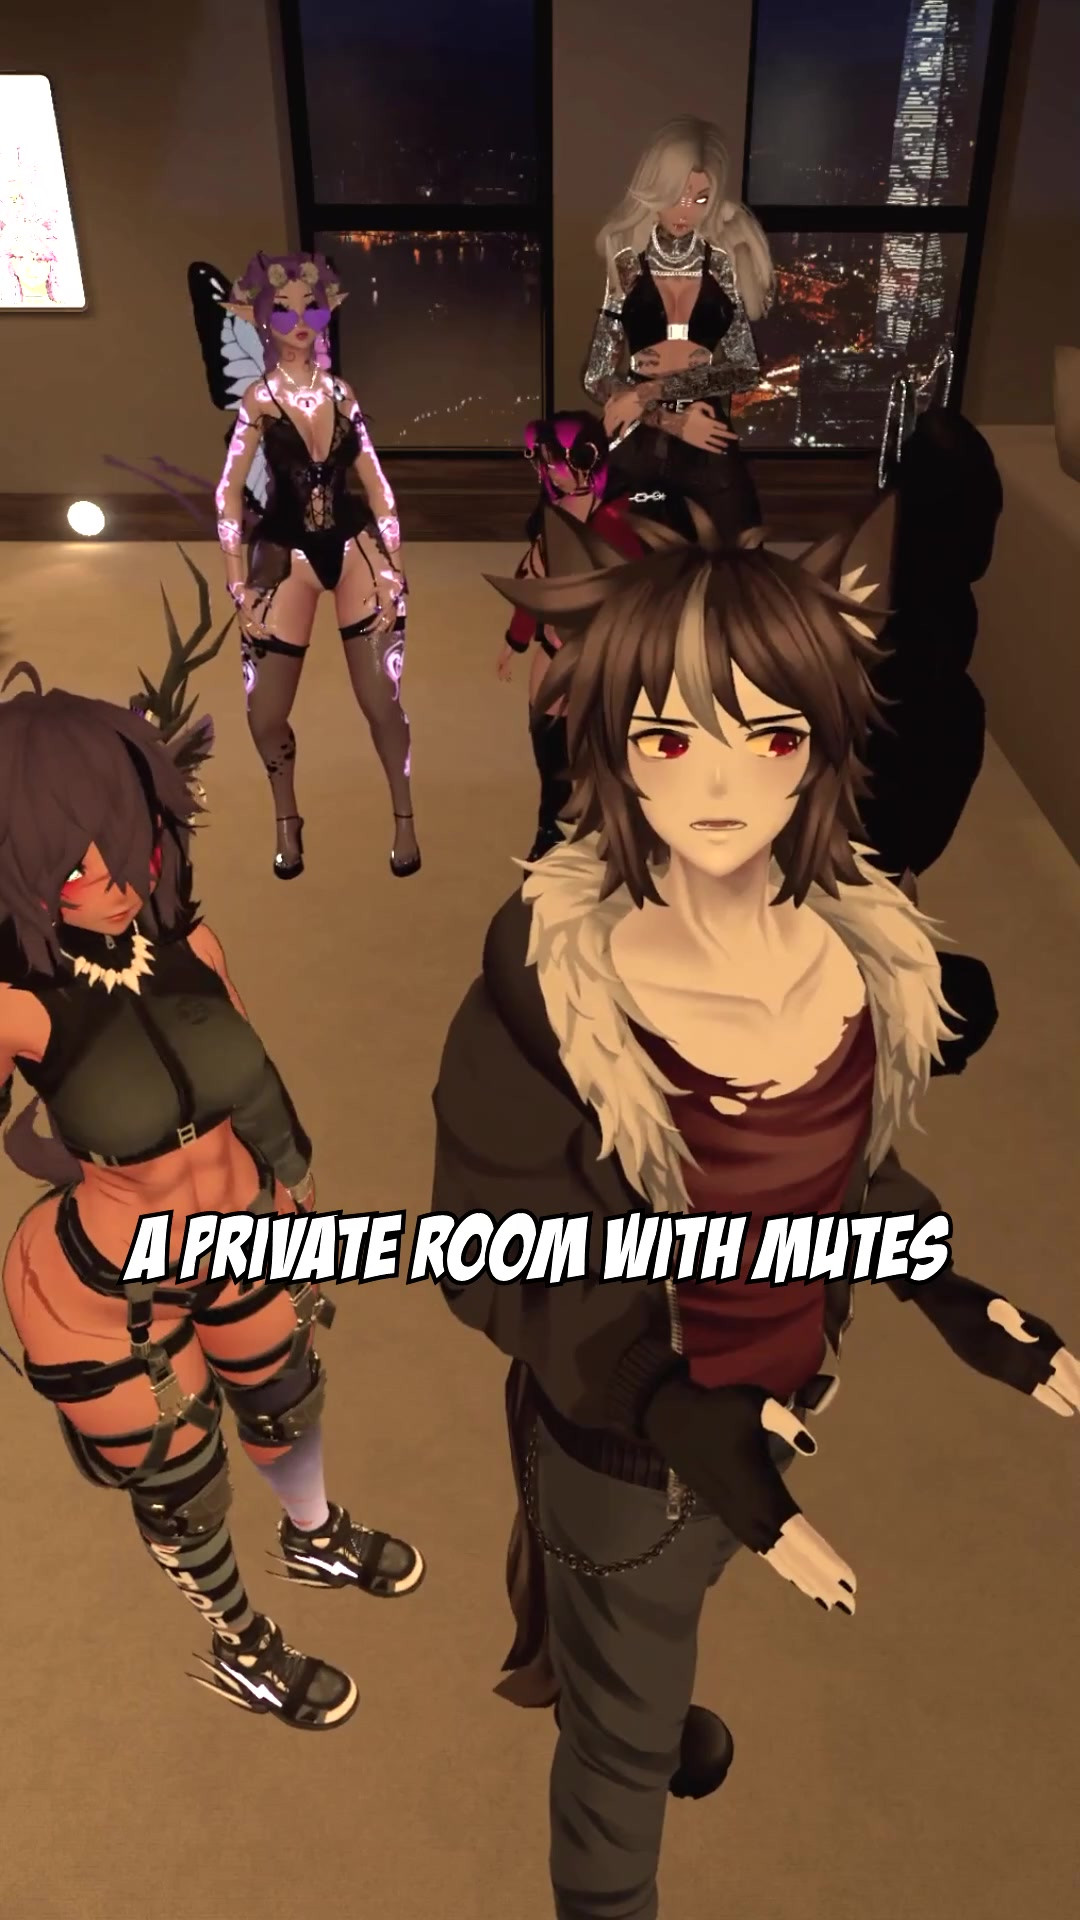 They locked me in a room, a private room, a private room with mutes... #rubberroom #rubberroomwithrats #vrchat #vrchatmemes #vrchatfunny #vrchatcommunity #vrchatcomedy #meme #memes #memestiktok #tfmjonny #vtuber #vr #parody #parodymeme